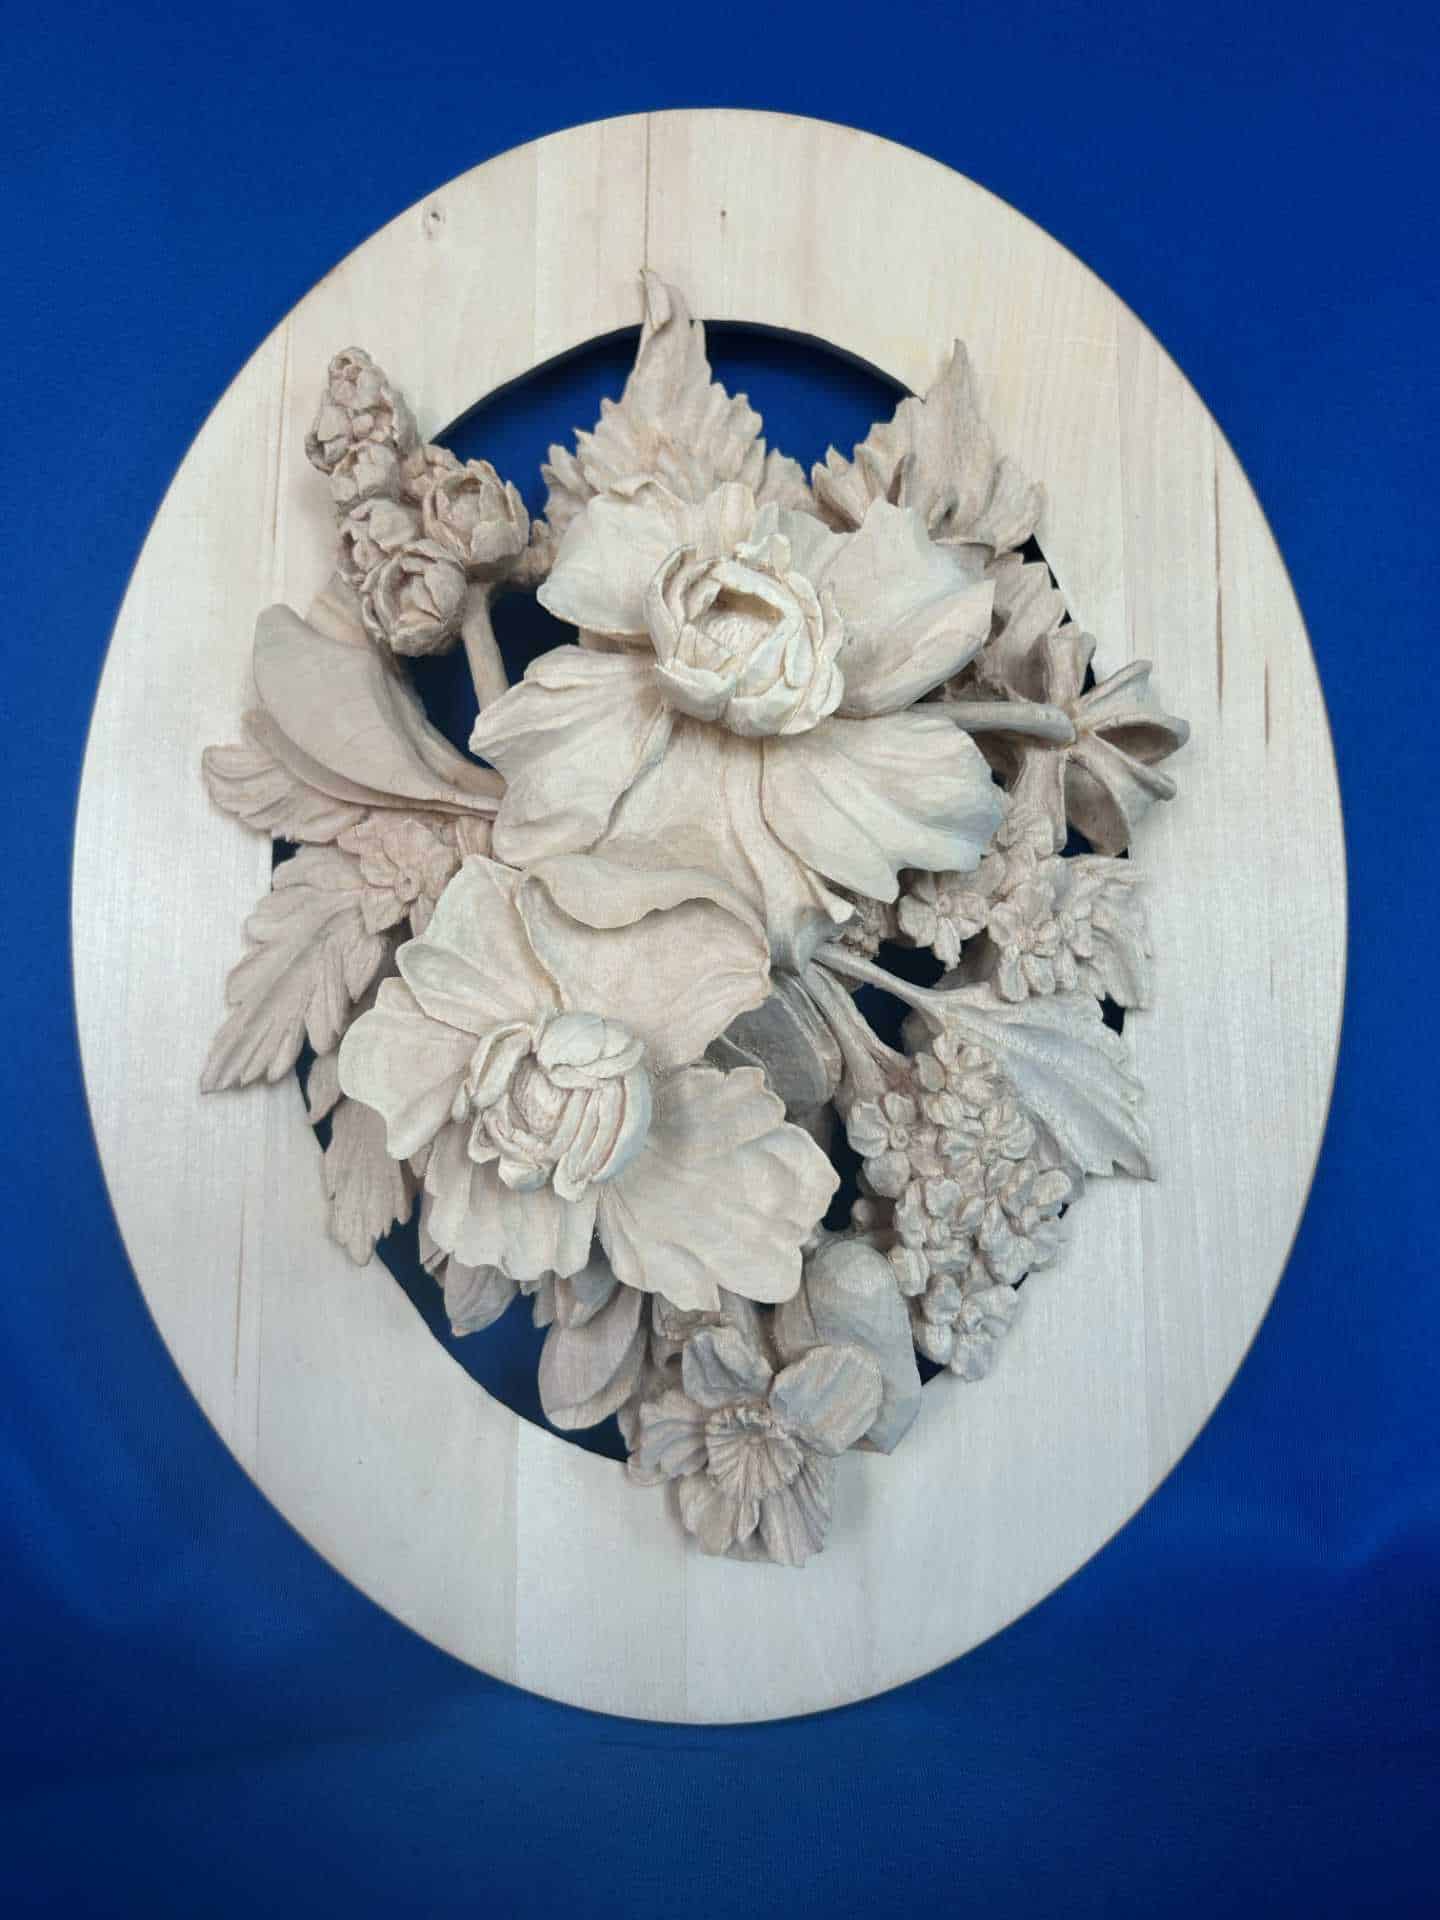 Carving by Student of School of Wood Carving - Cheryl